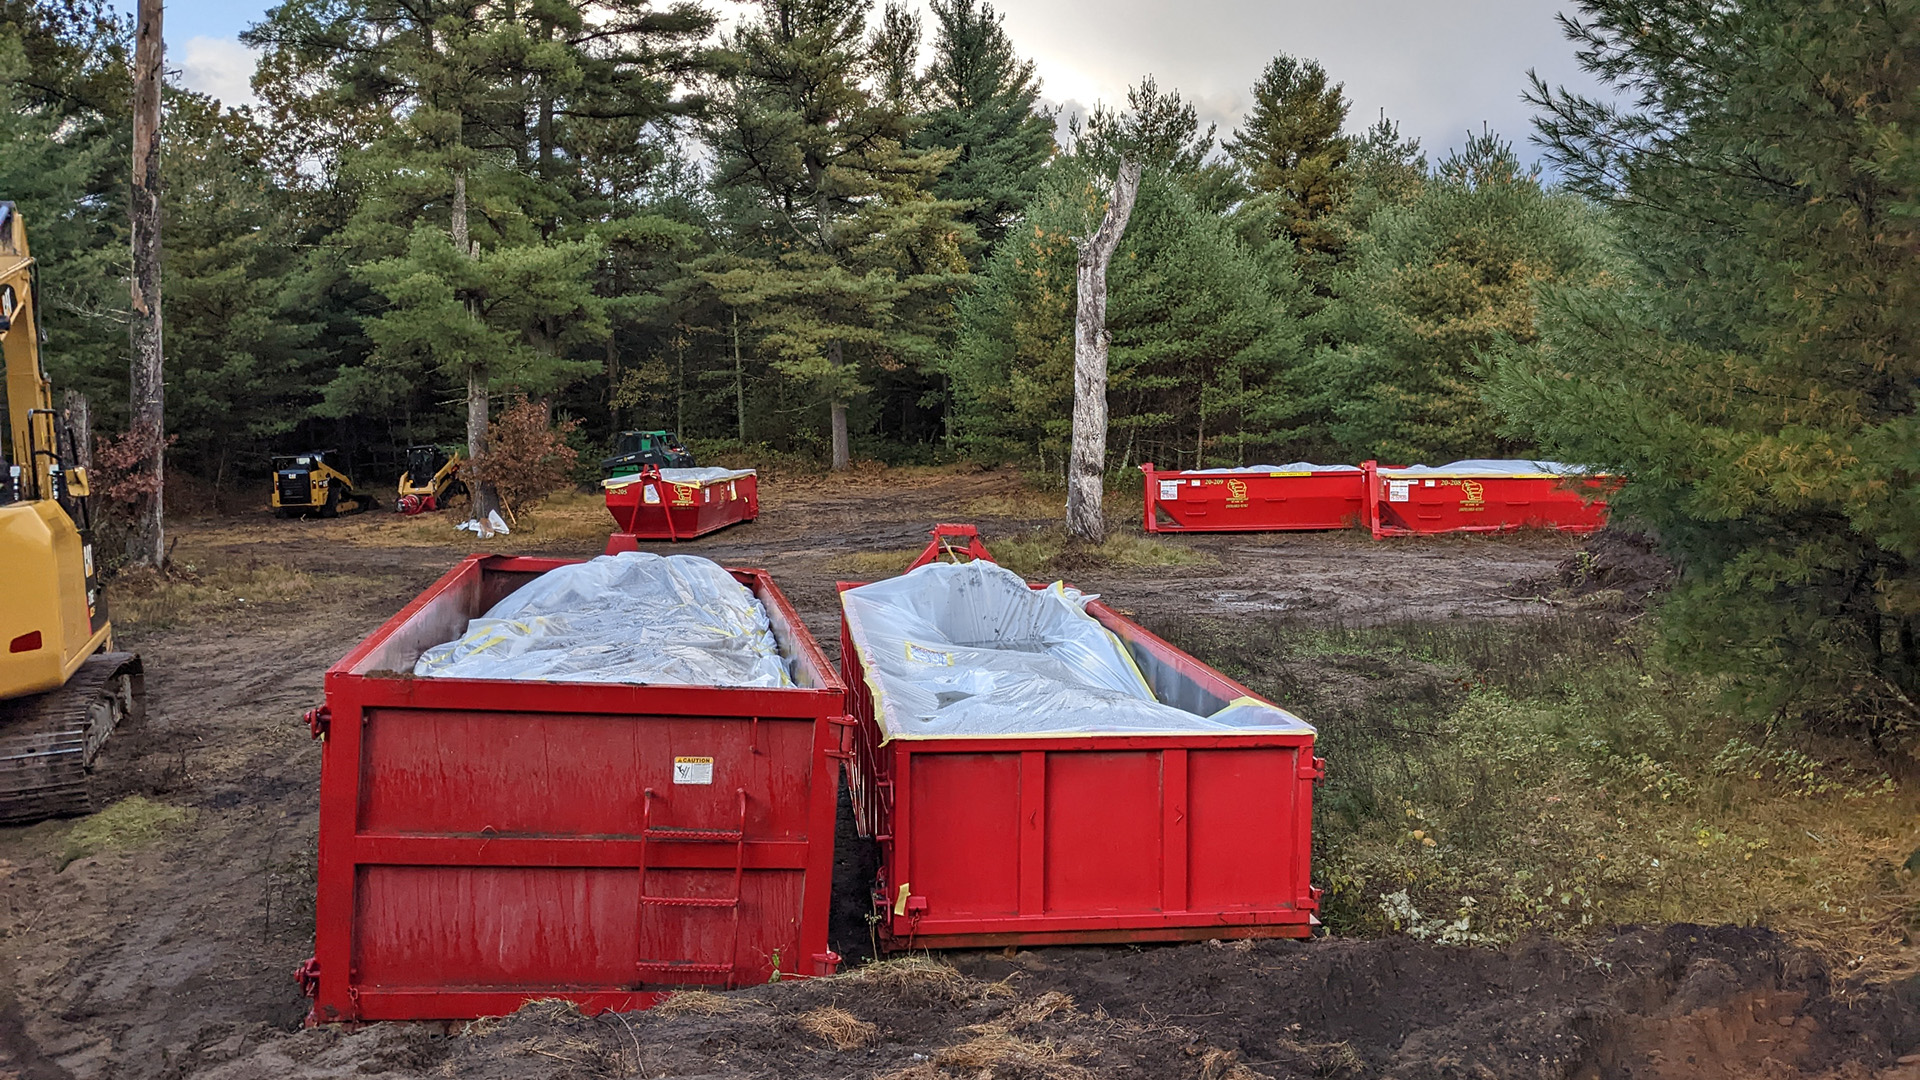 Five construction dumpsters are placed in three locations alongside multiple construction vehicles in a clearing, filled with debris covered by plastic sheets, with trees in the background.